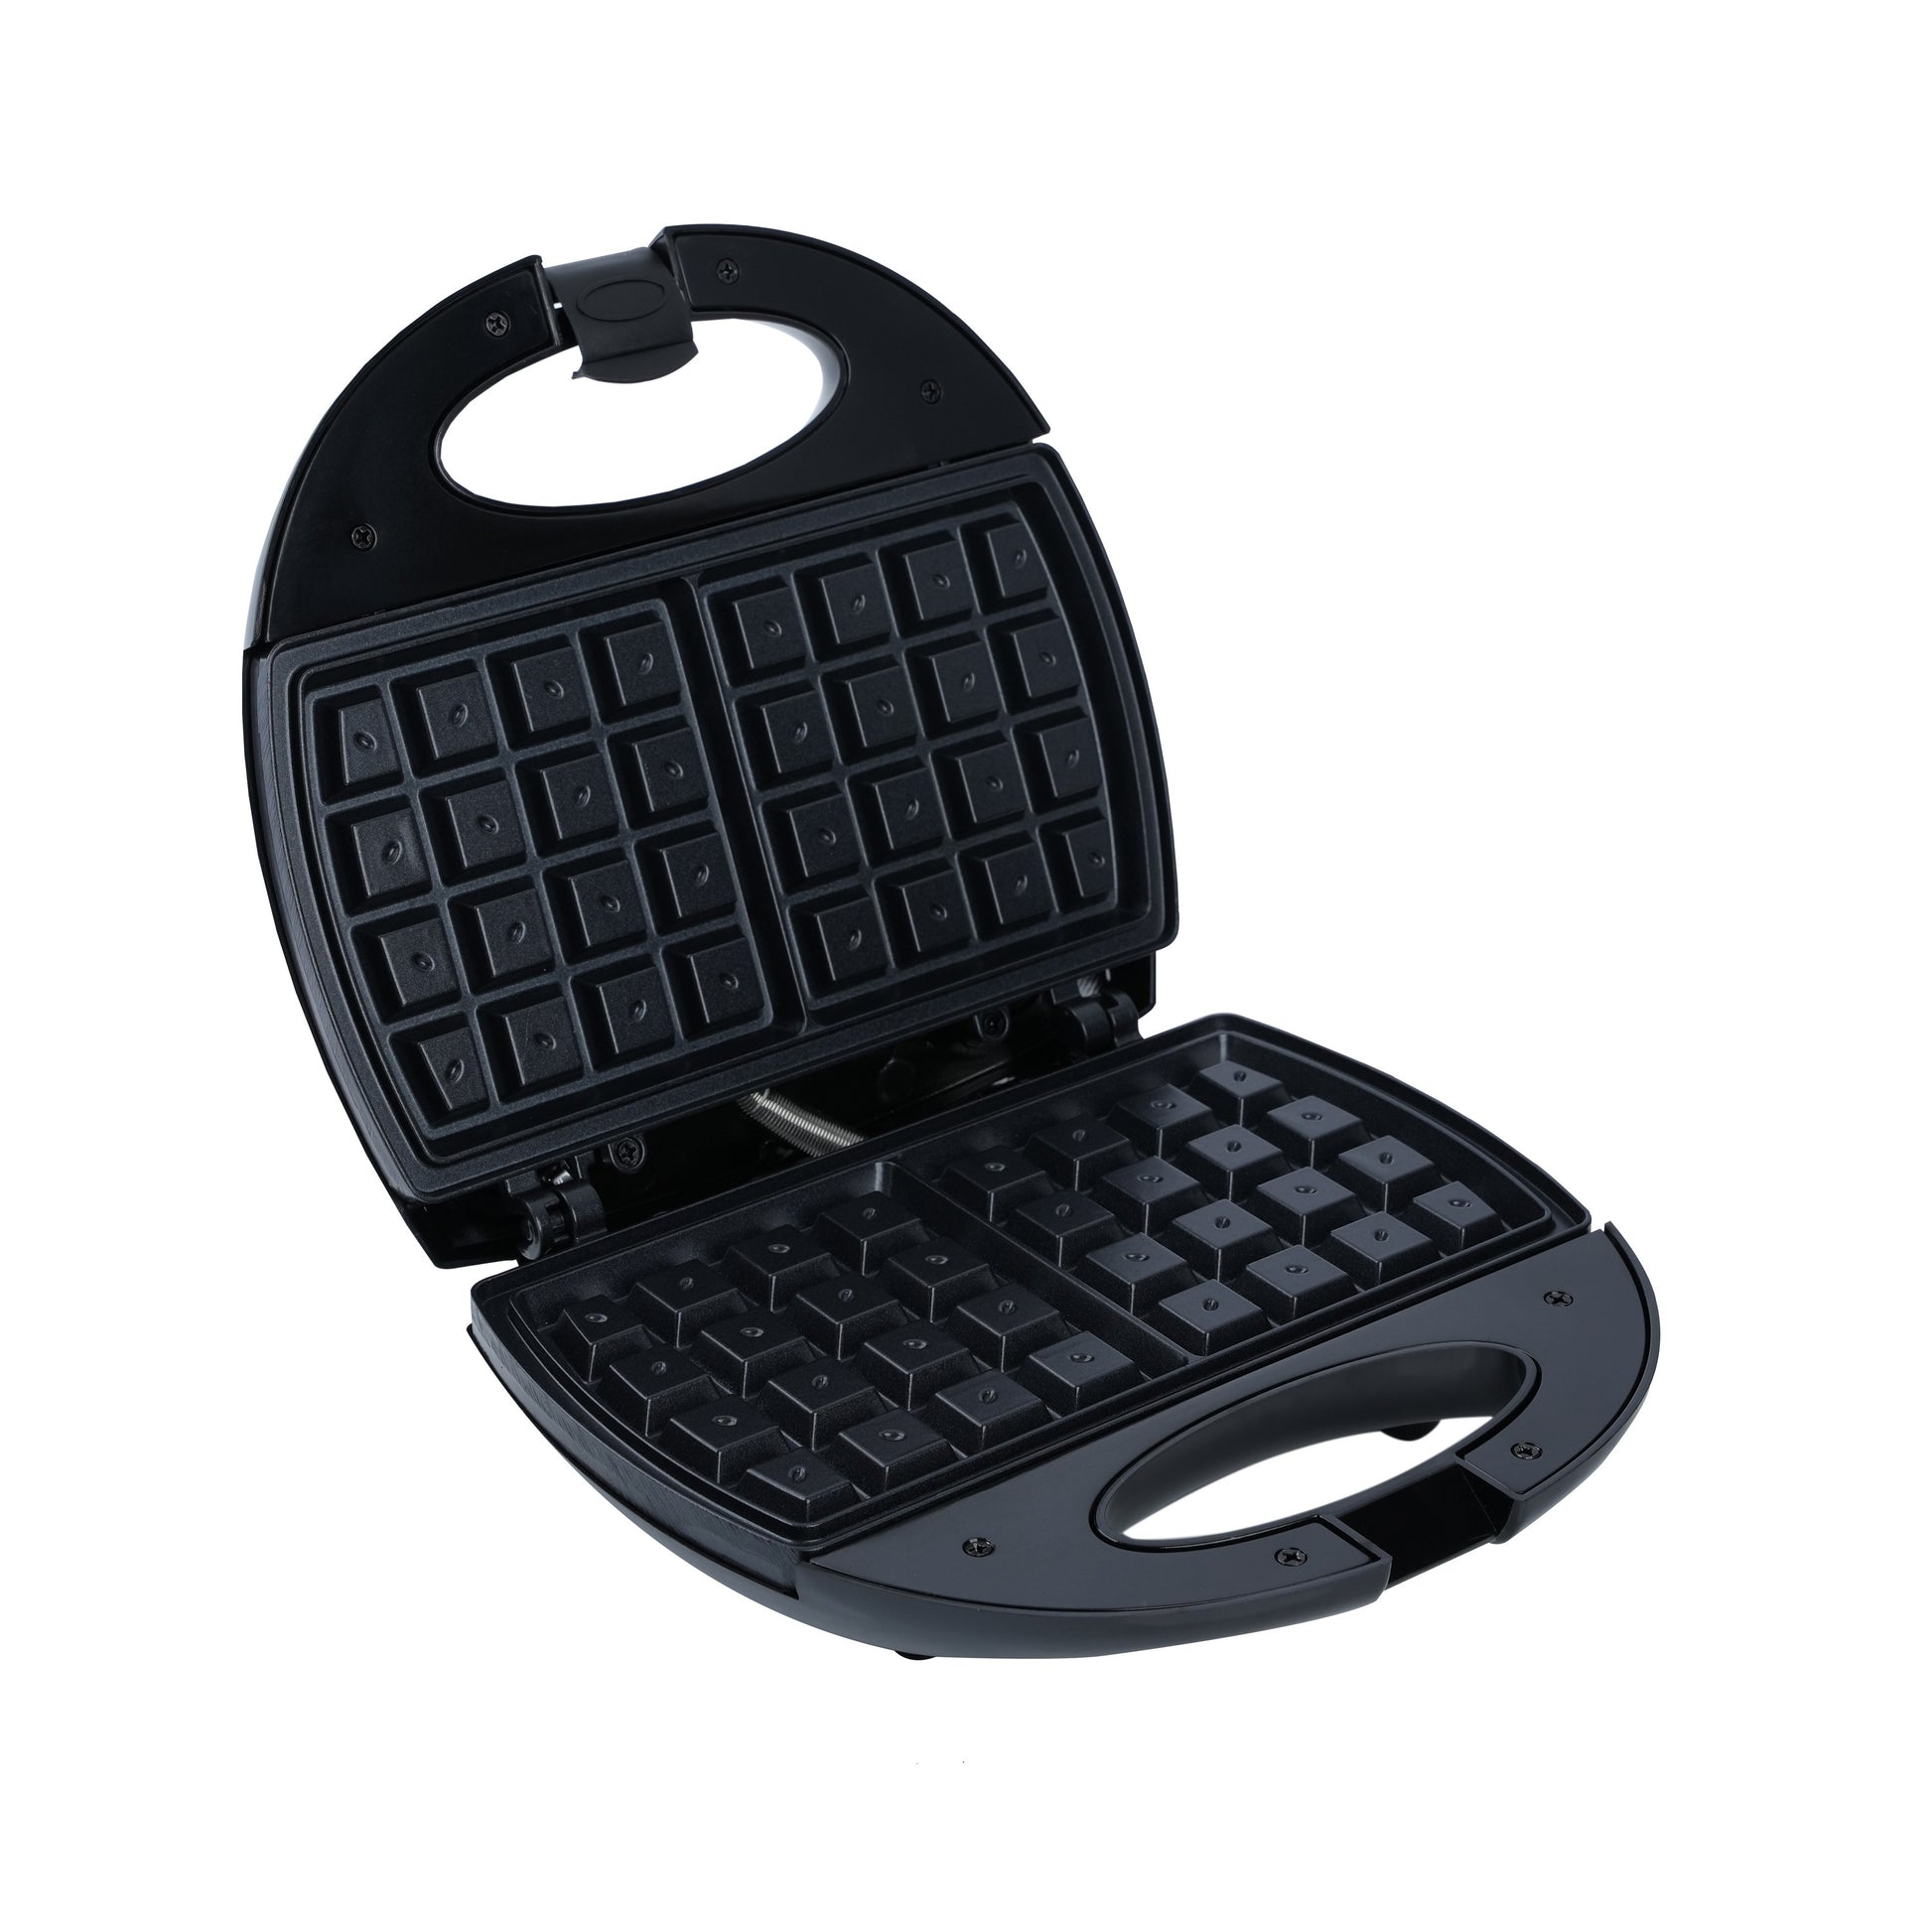 Shop the Best 2-Slice Waffle Maker for Delicious Breakfasts – SONASHI